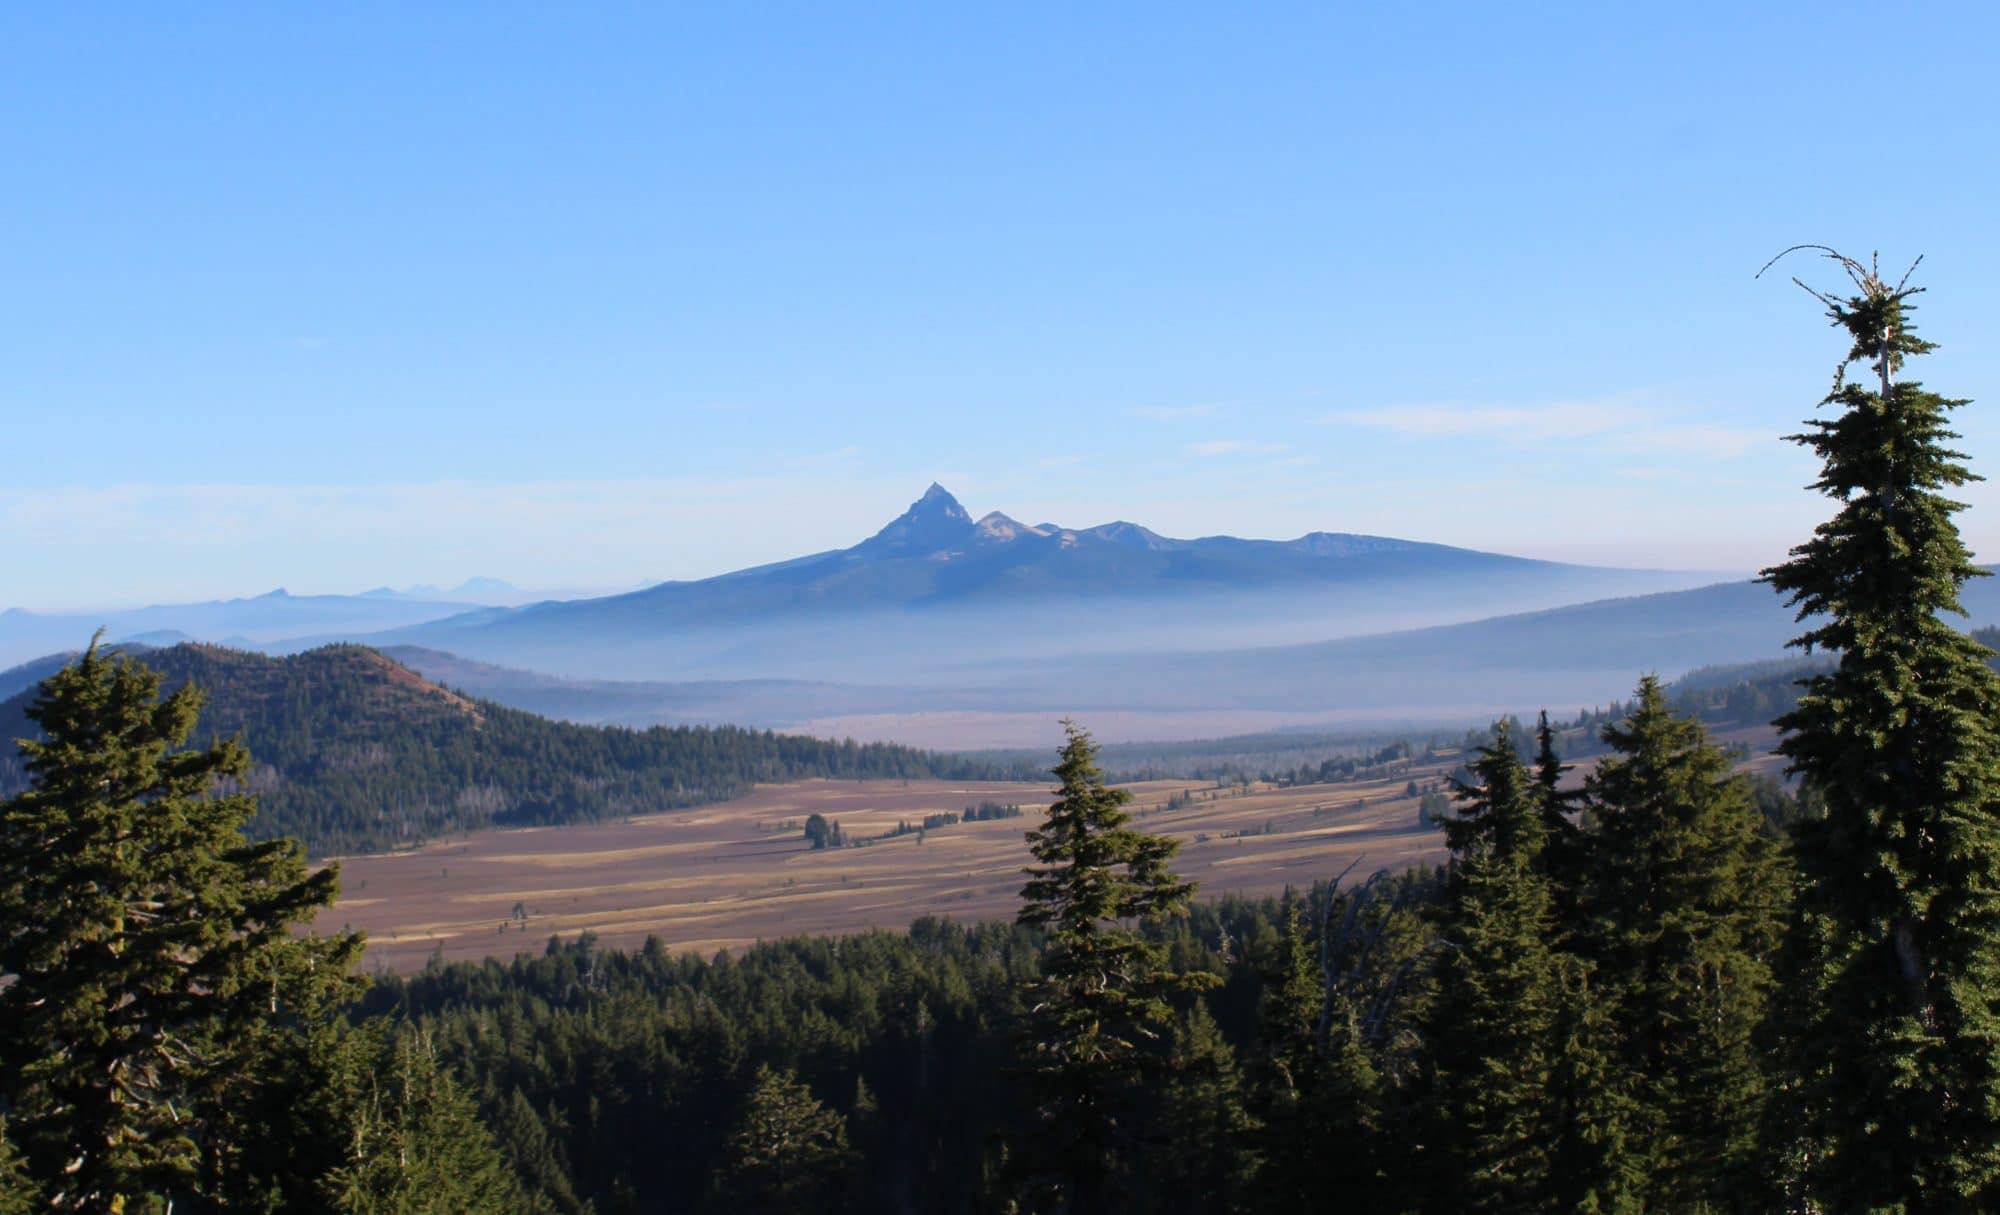 Things to do in Bend Oregon